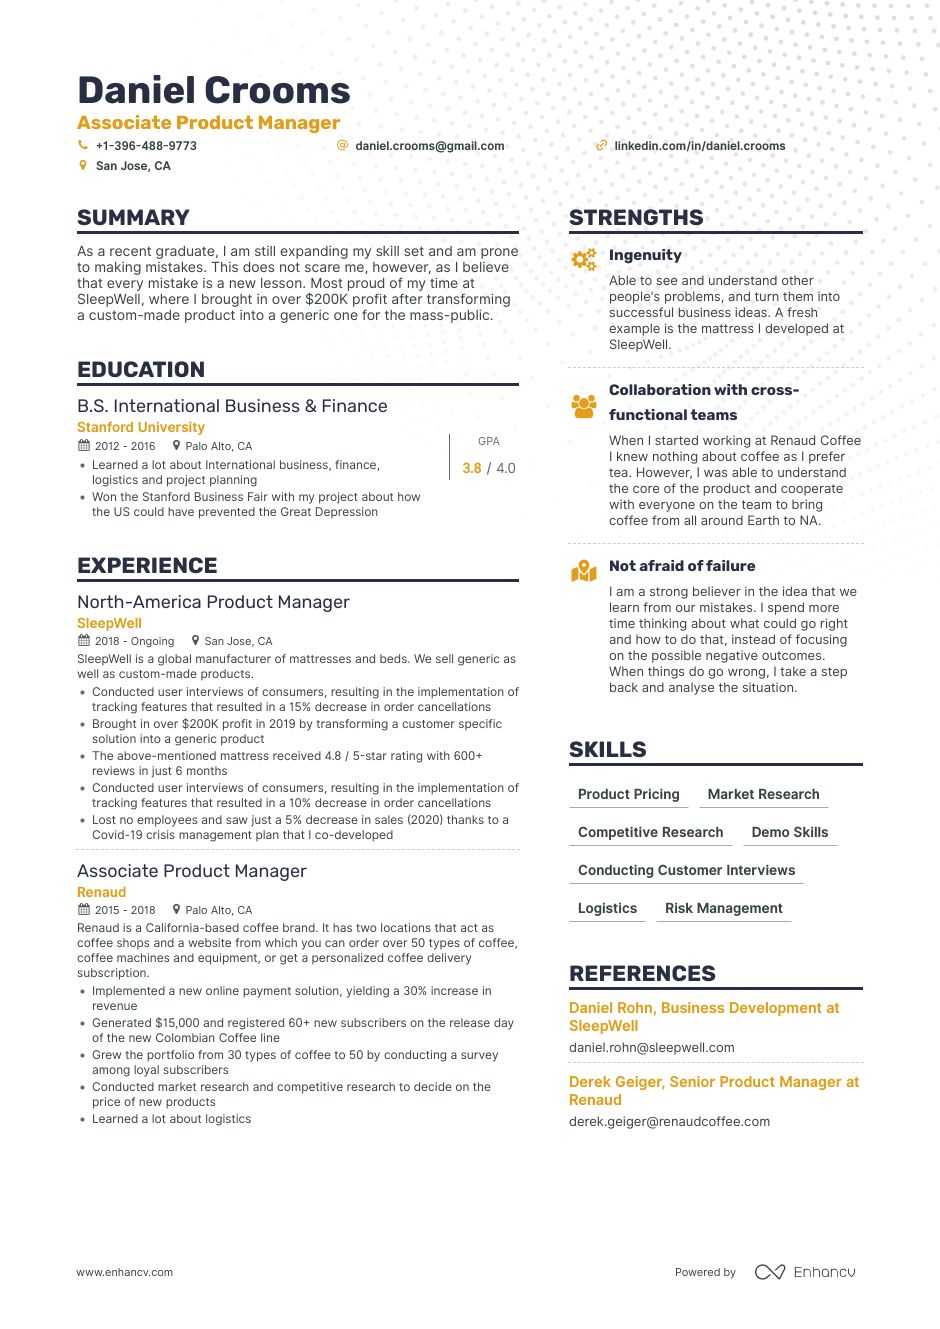 Product Manager Resume Examples Guide For 2021